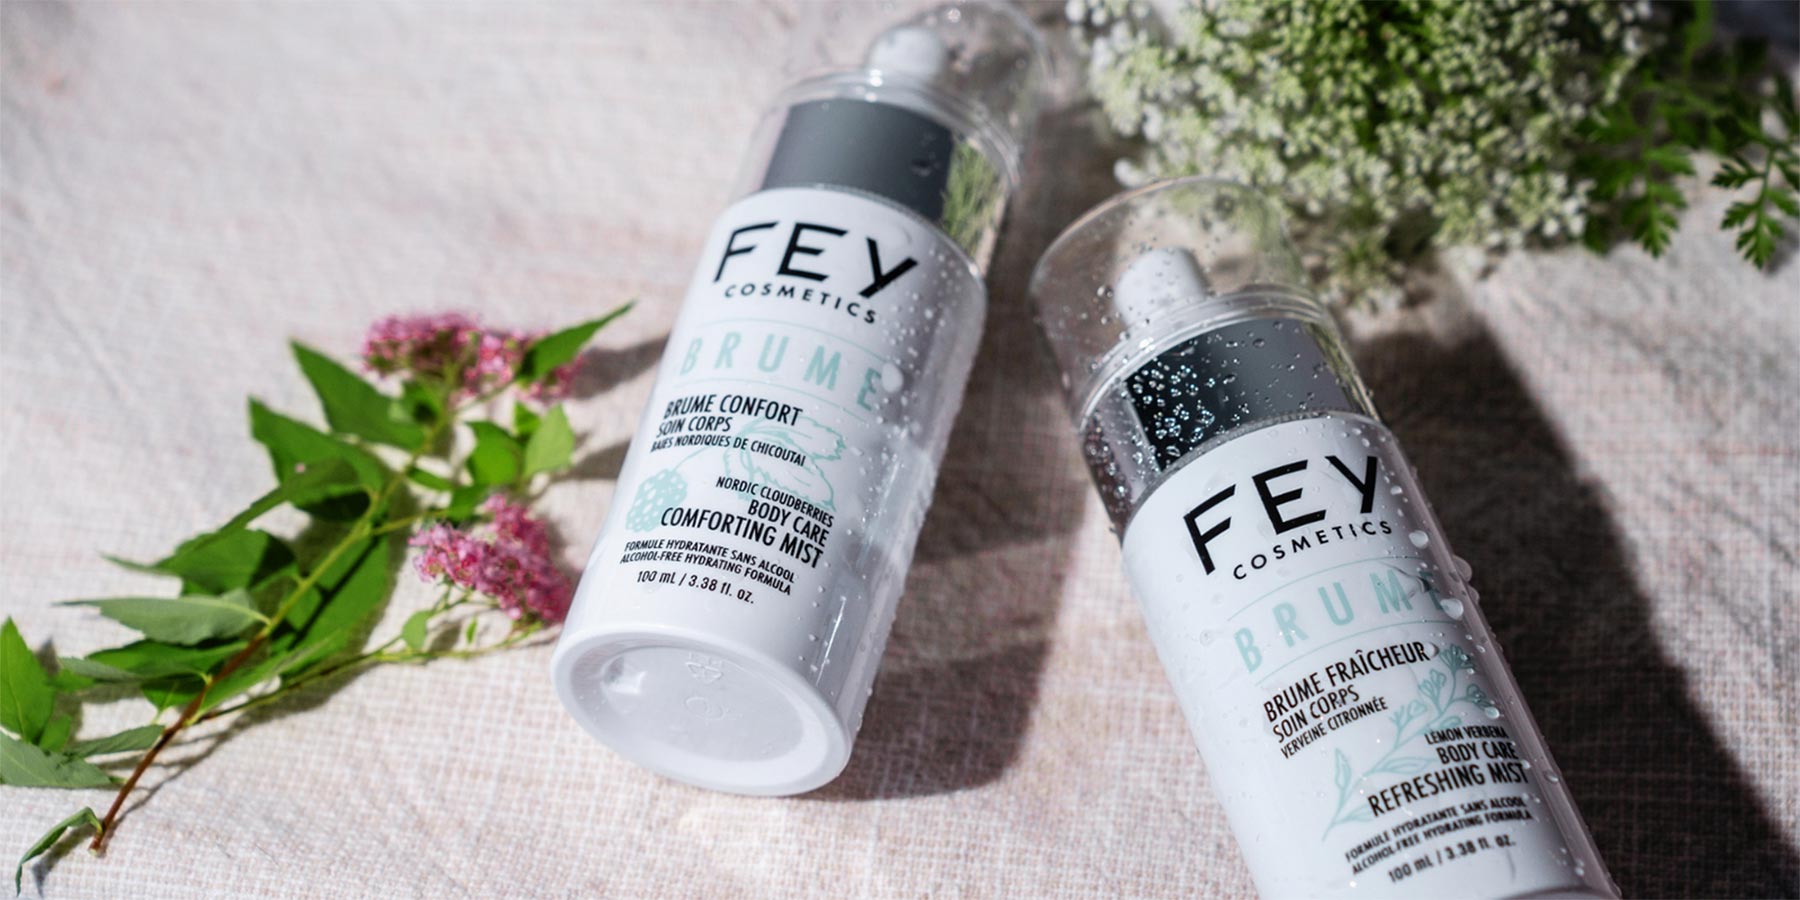 FEY listed as part of the "visionary cosmetics companies"